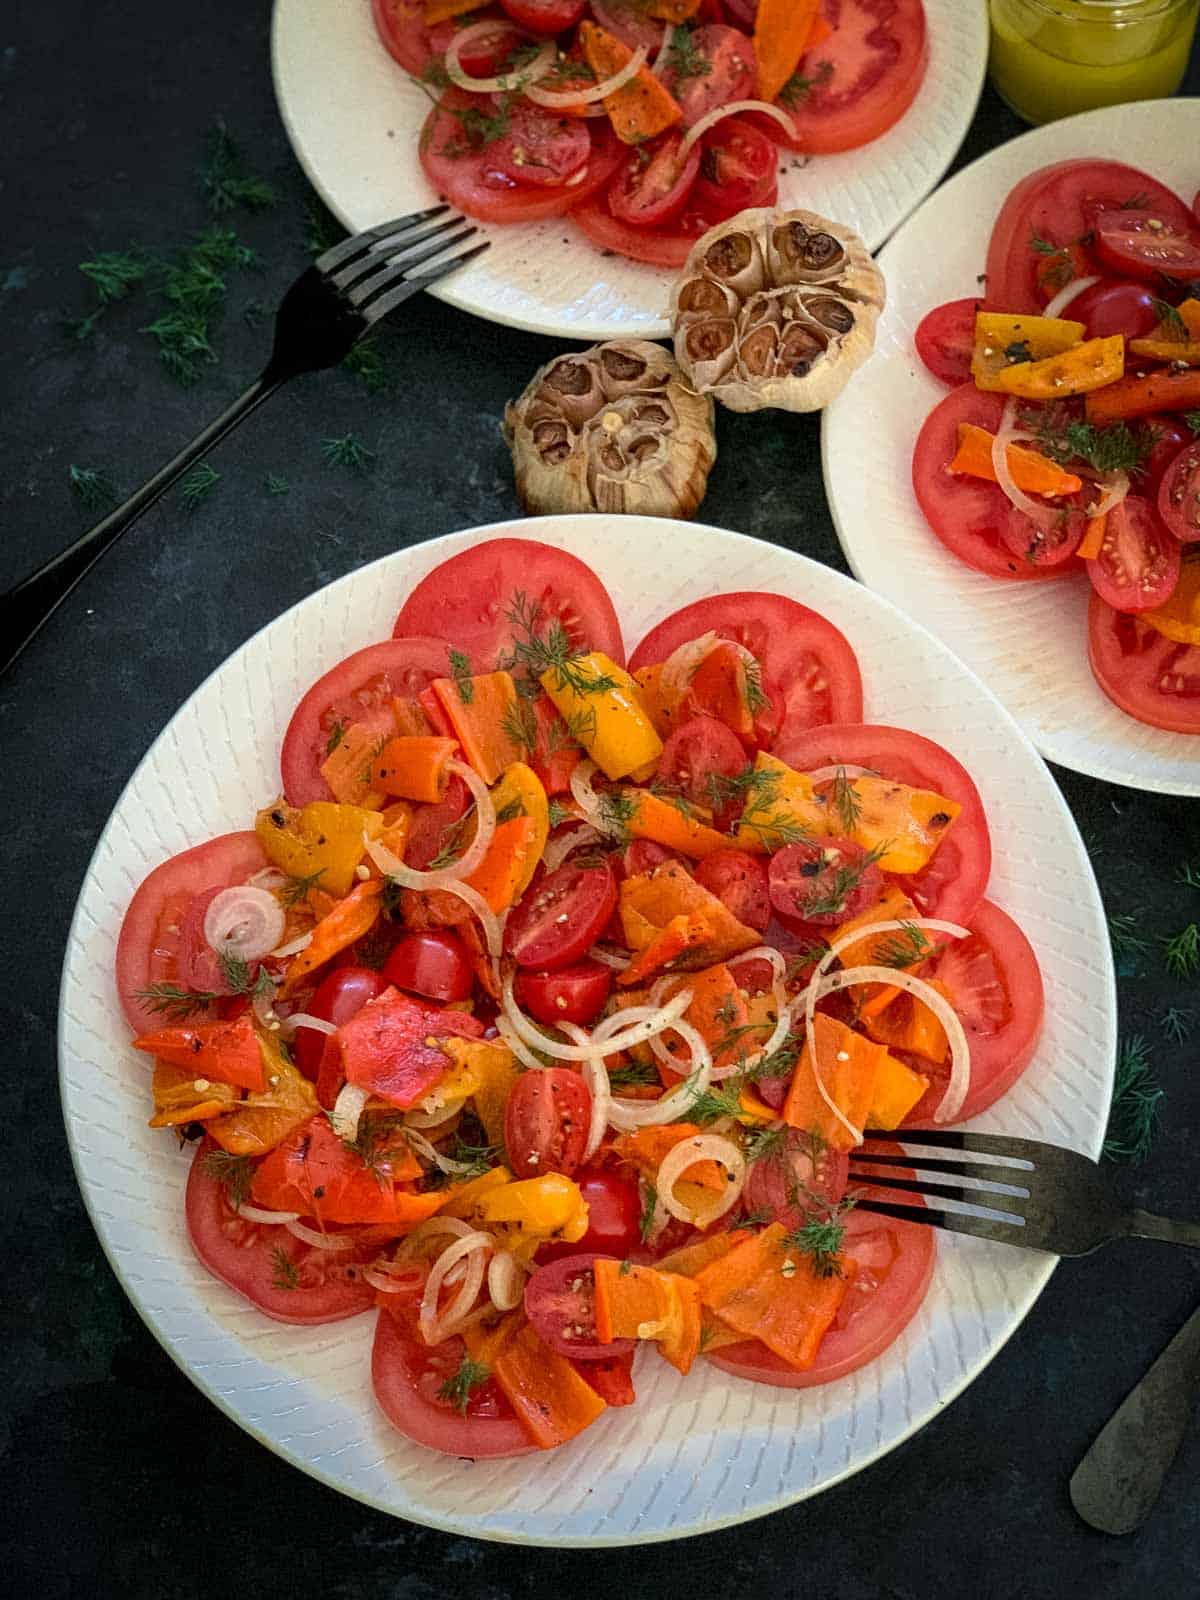 3 serves of Baby Bell Peppers Salad with Roasted Garlic on white plates with black forks